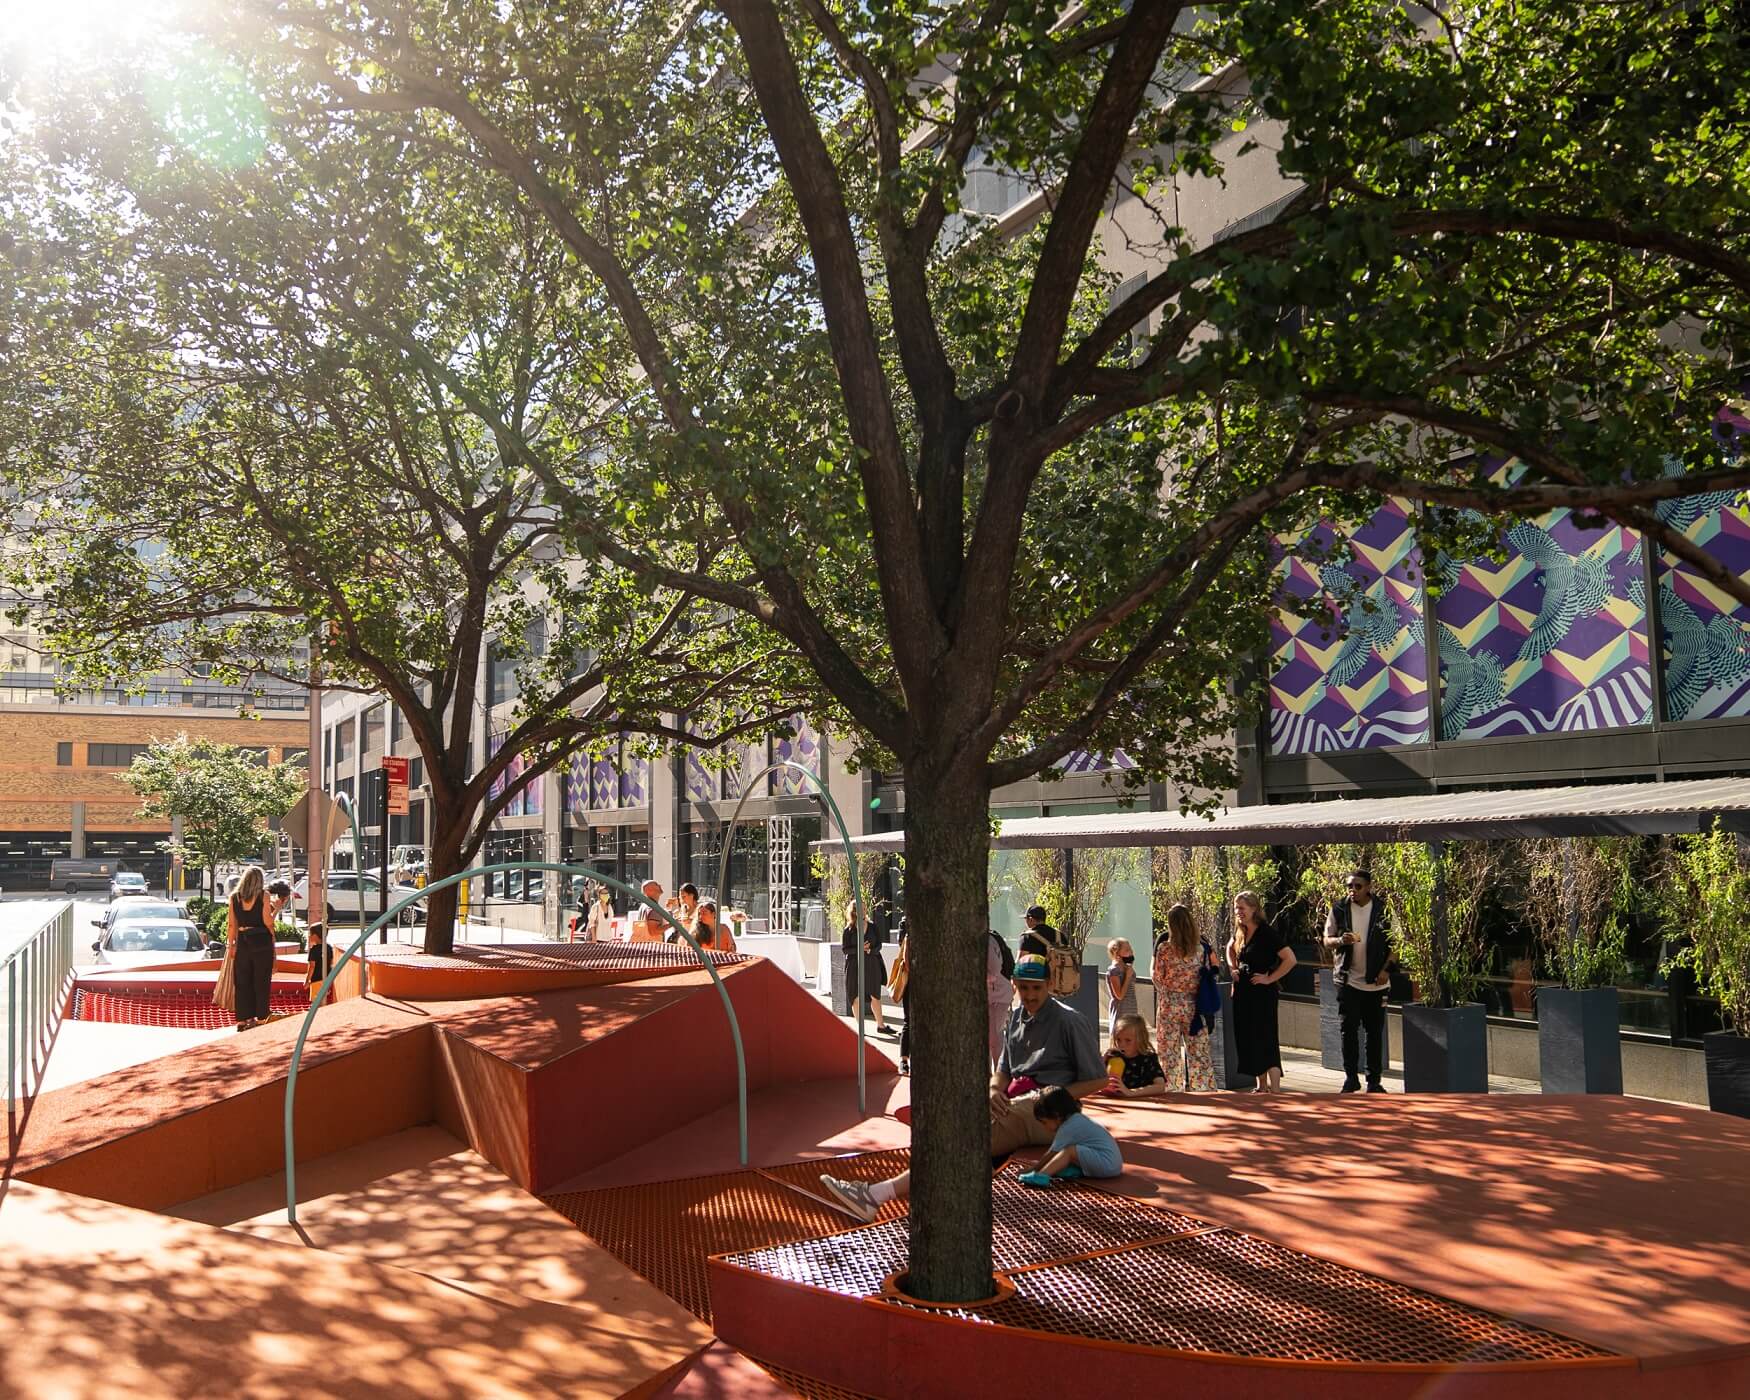 An orange metal installation outside with trees on it